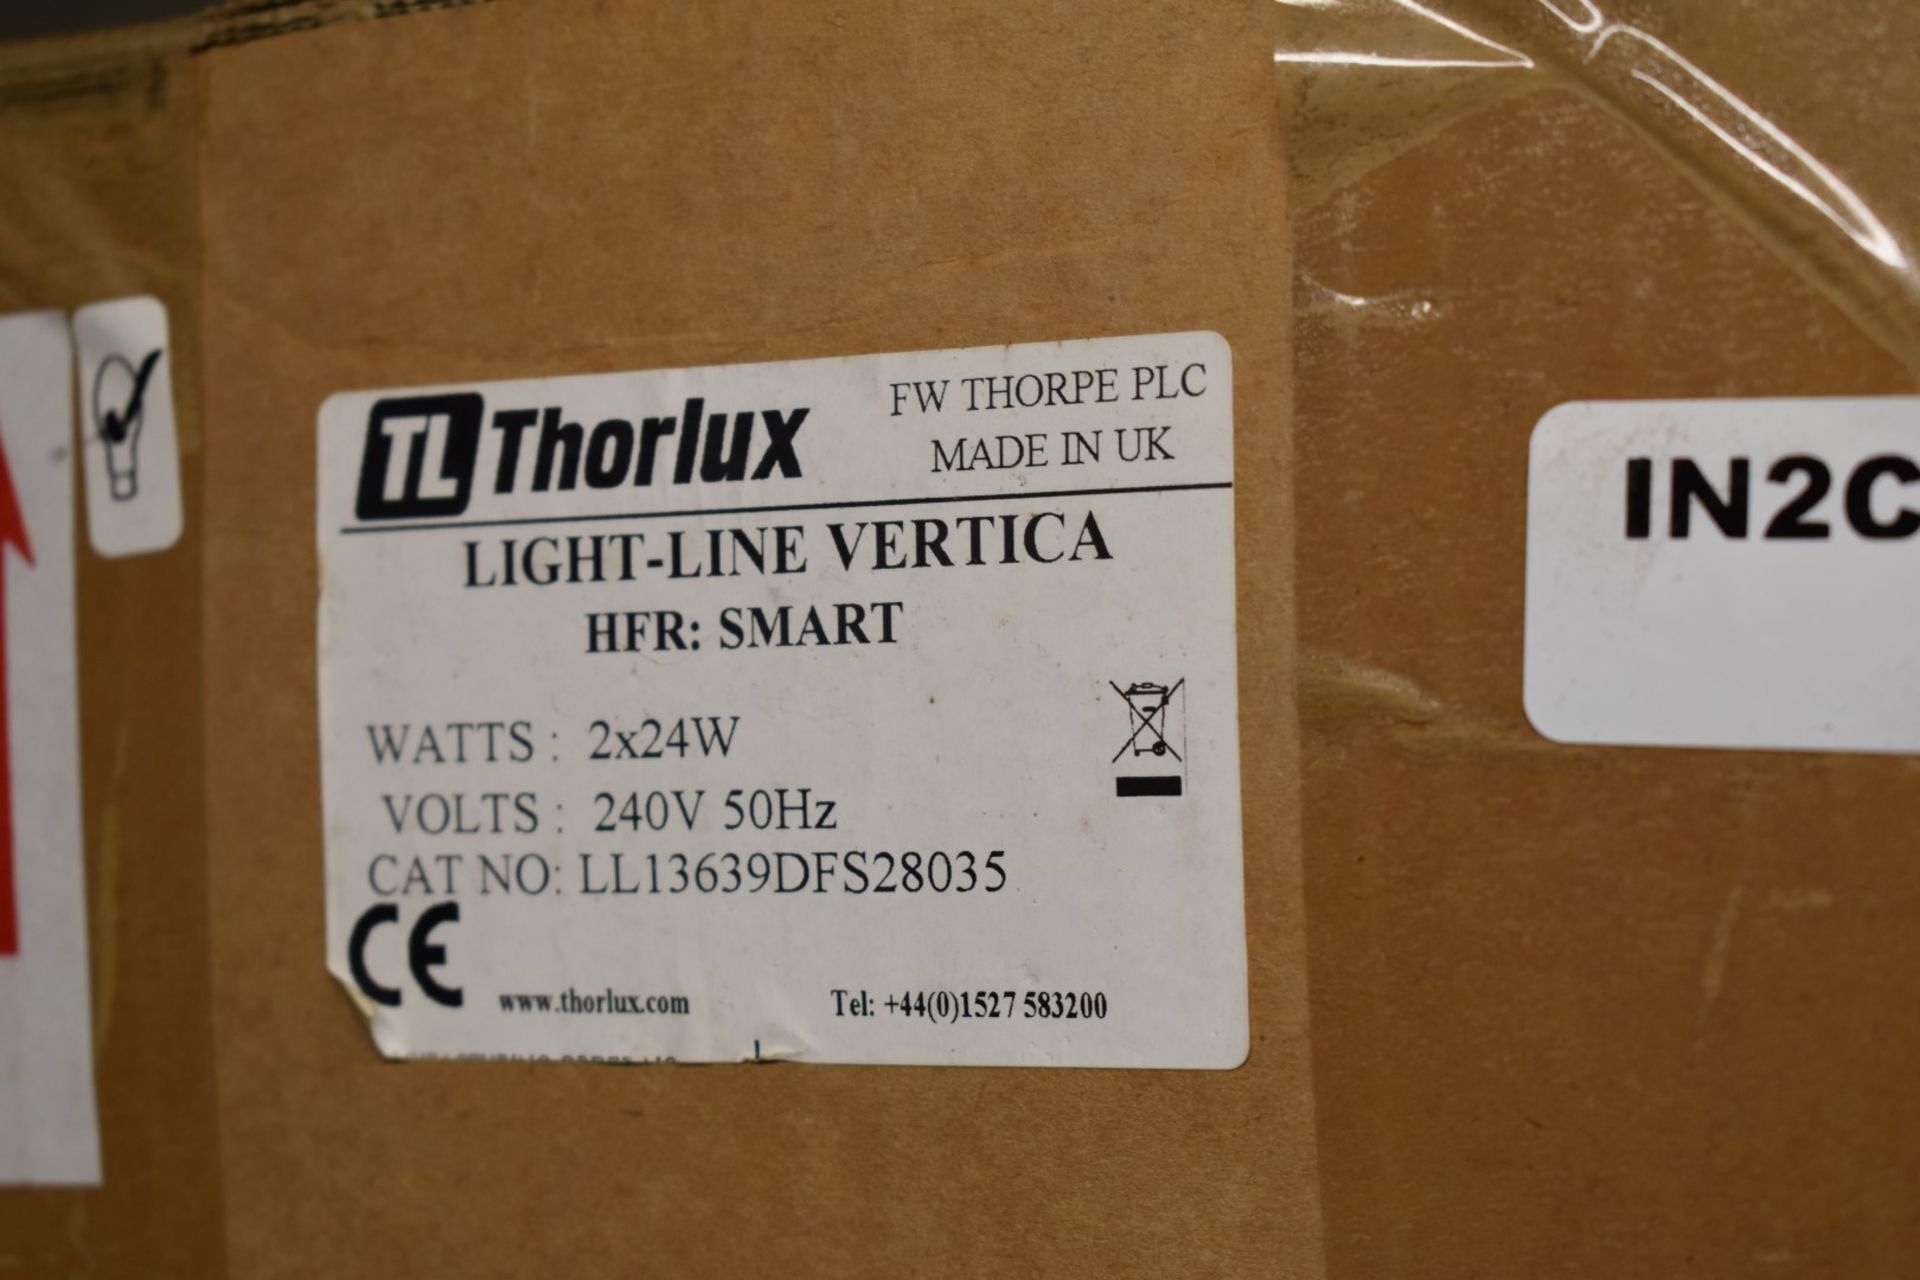 4 x Thorlux L Line Vertica Smart Industrial Lights - 2 x 24w 240v 50Hz - Boxed Stock - Image 4 of 7